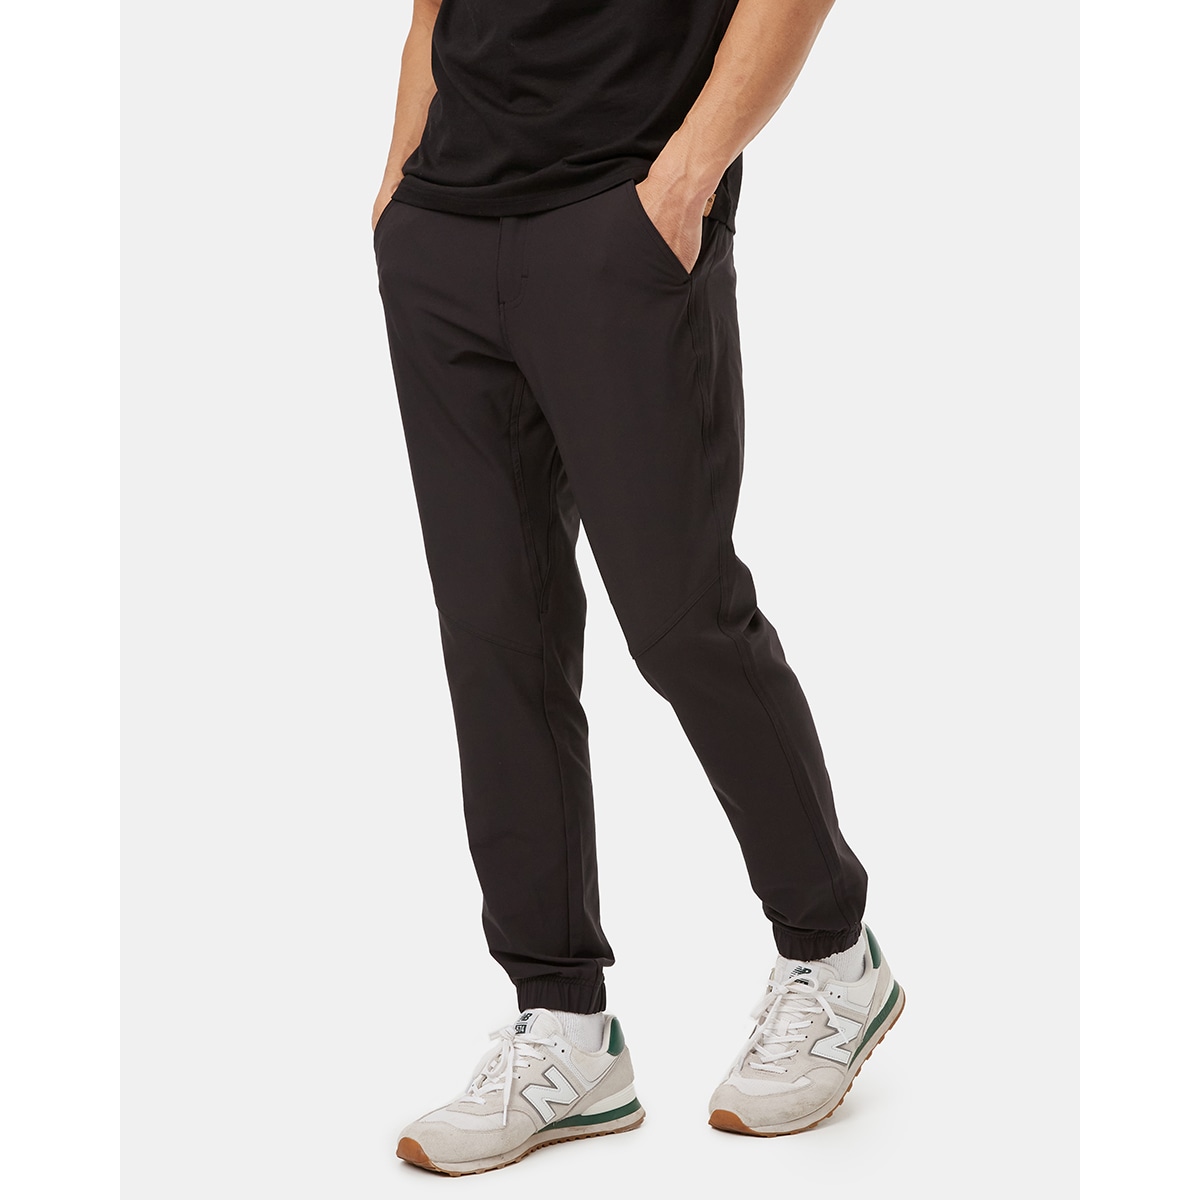 Men's InMotion Stretch Joggers